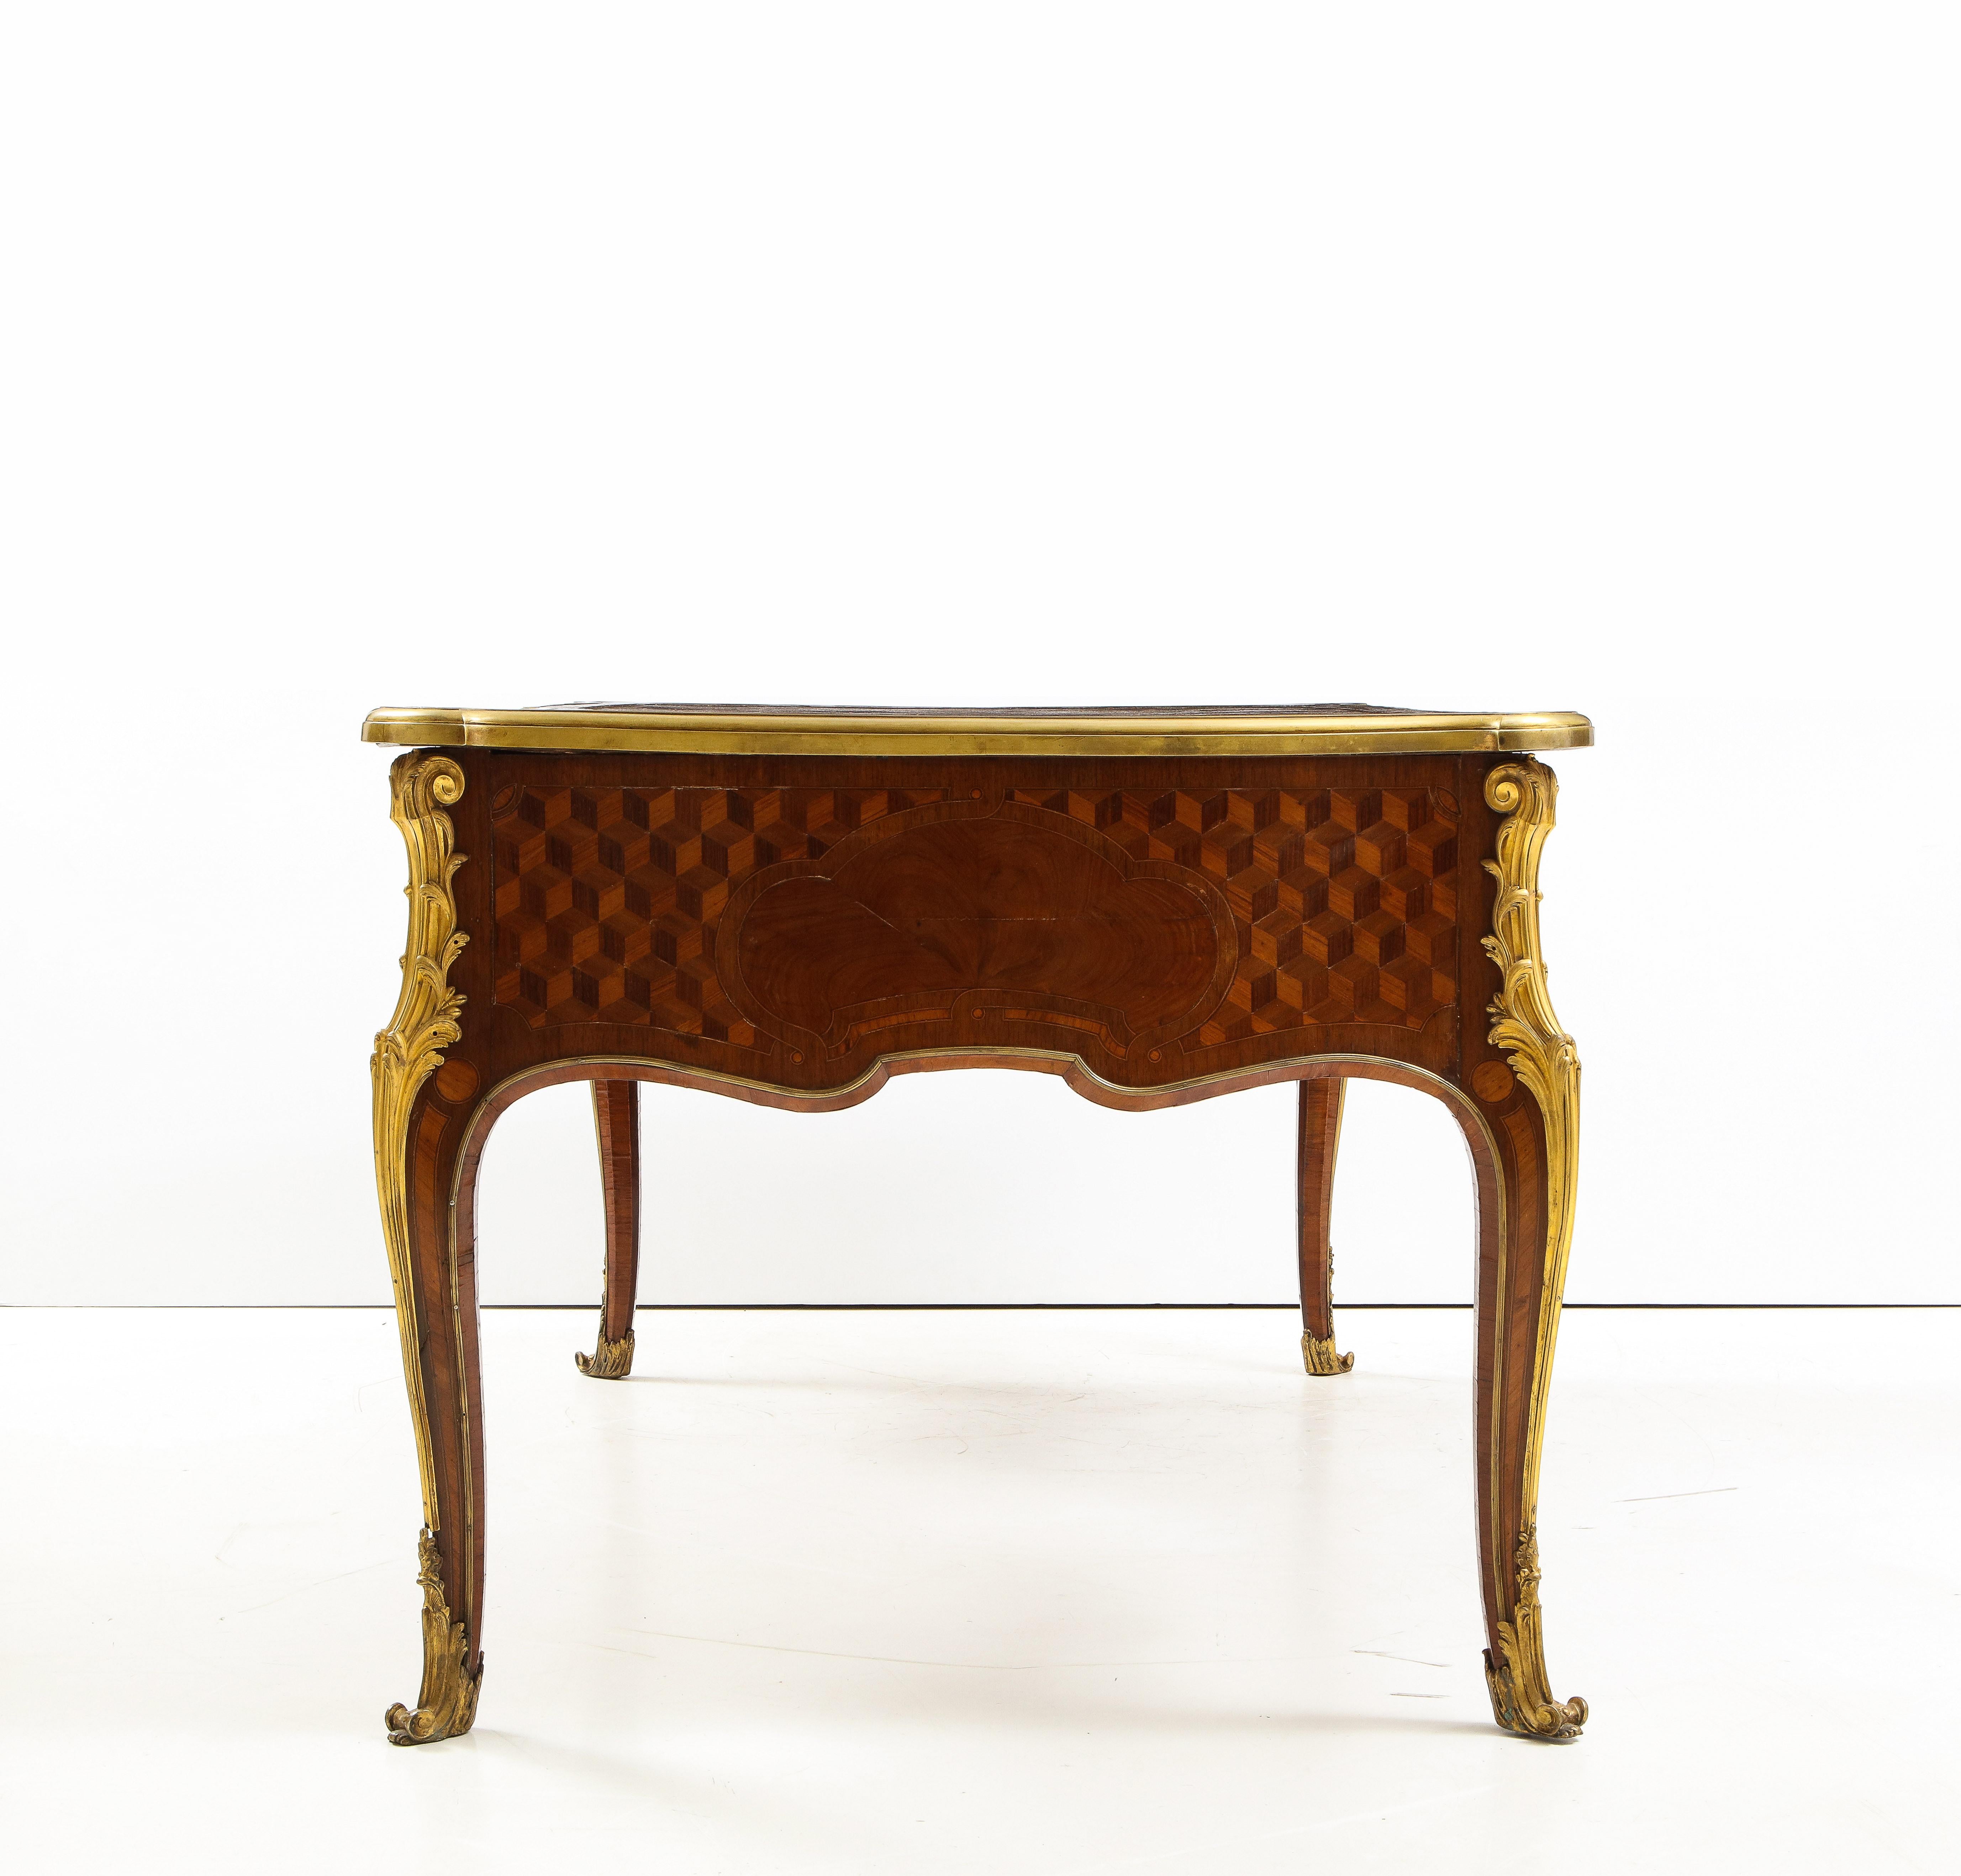 Fine Louis XV Style Marquetry Bureau Plat Attributed to François Linke For Sale 8